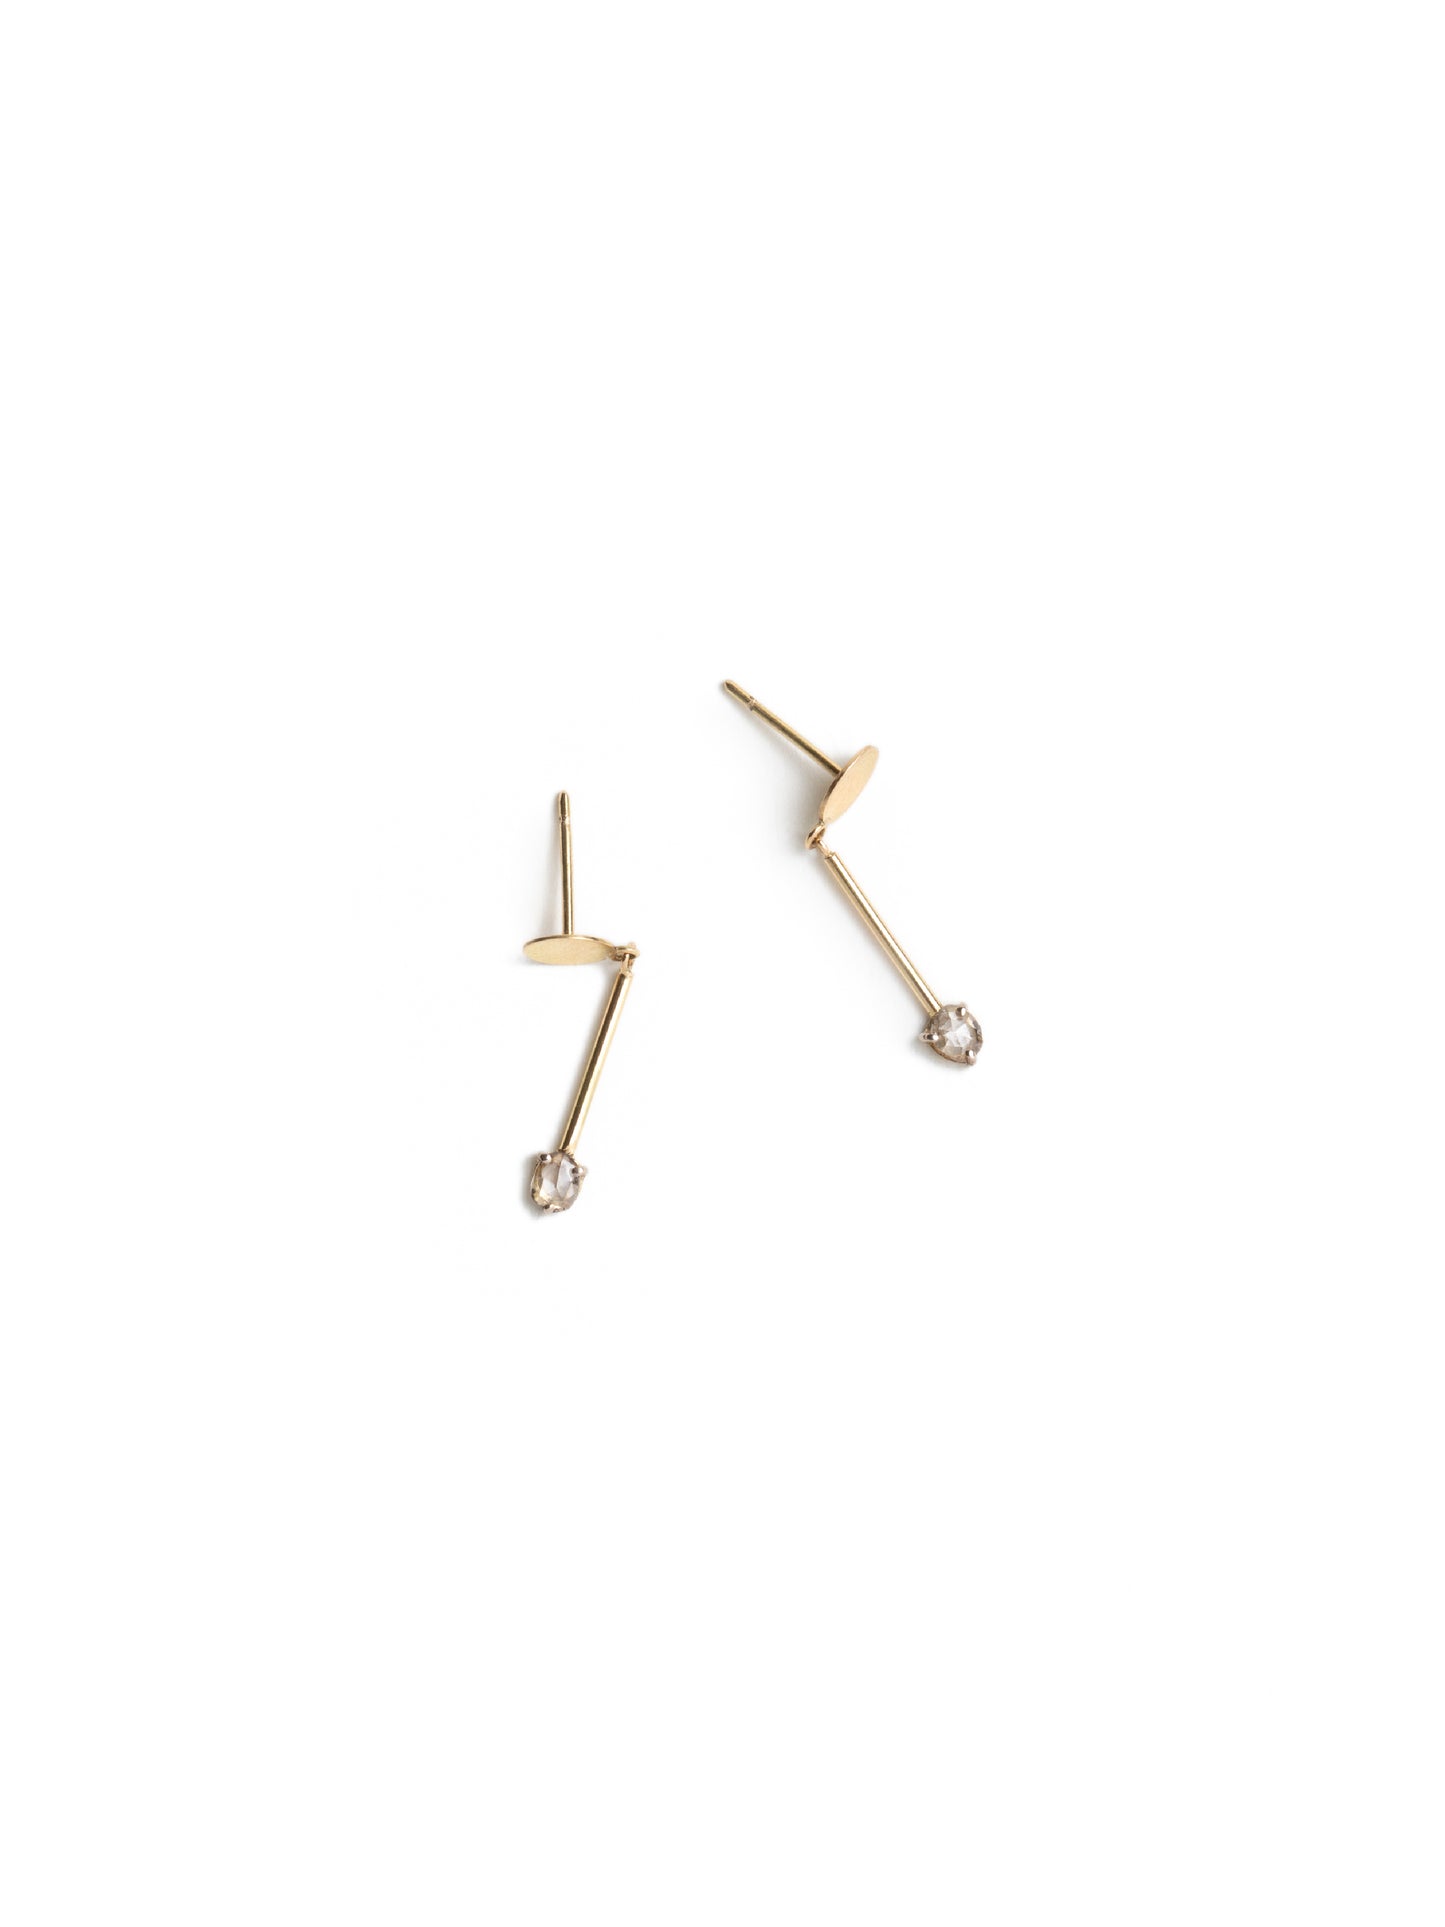 GOLD EARRINGS WITH 1 DIAMOND